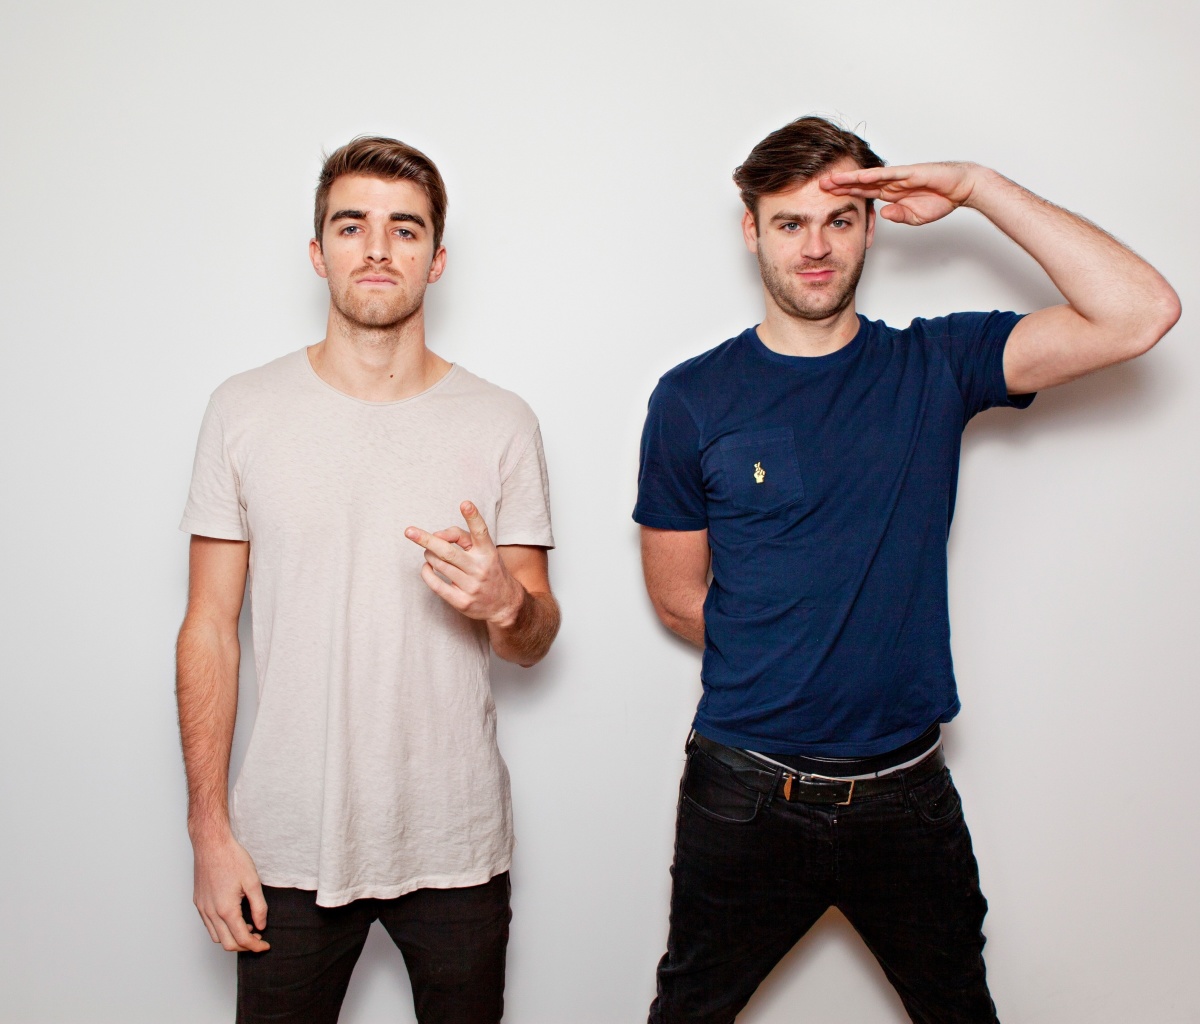 The Chainsmokers with Andrew Taggart and Alex Pall screenshot #1 1200x1024